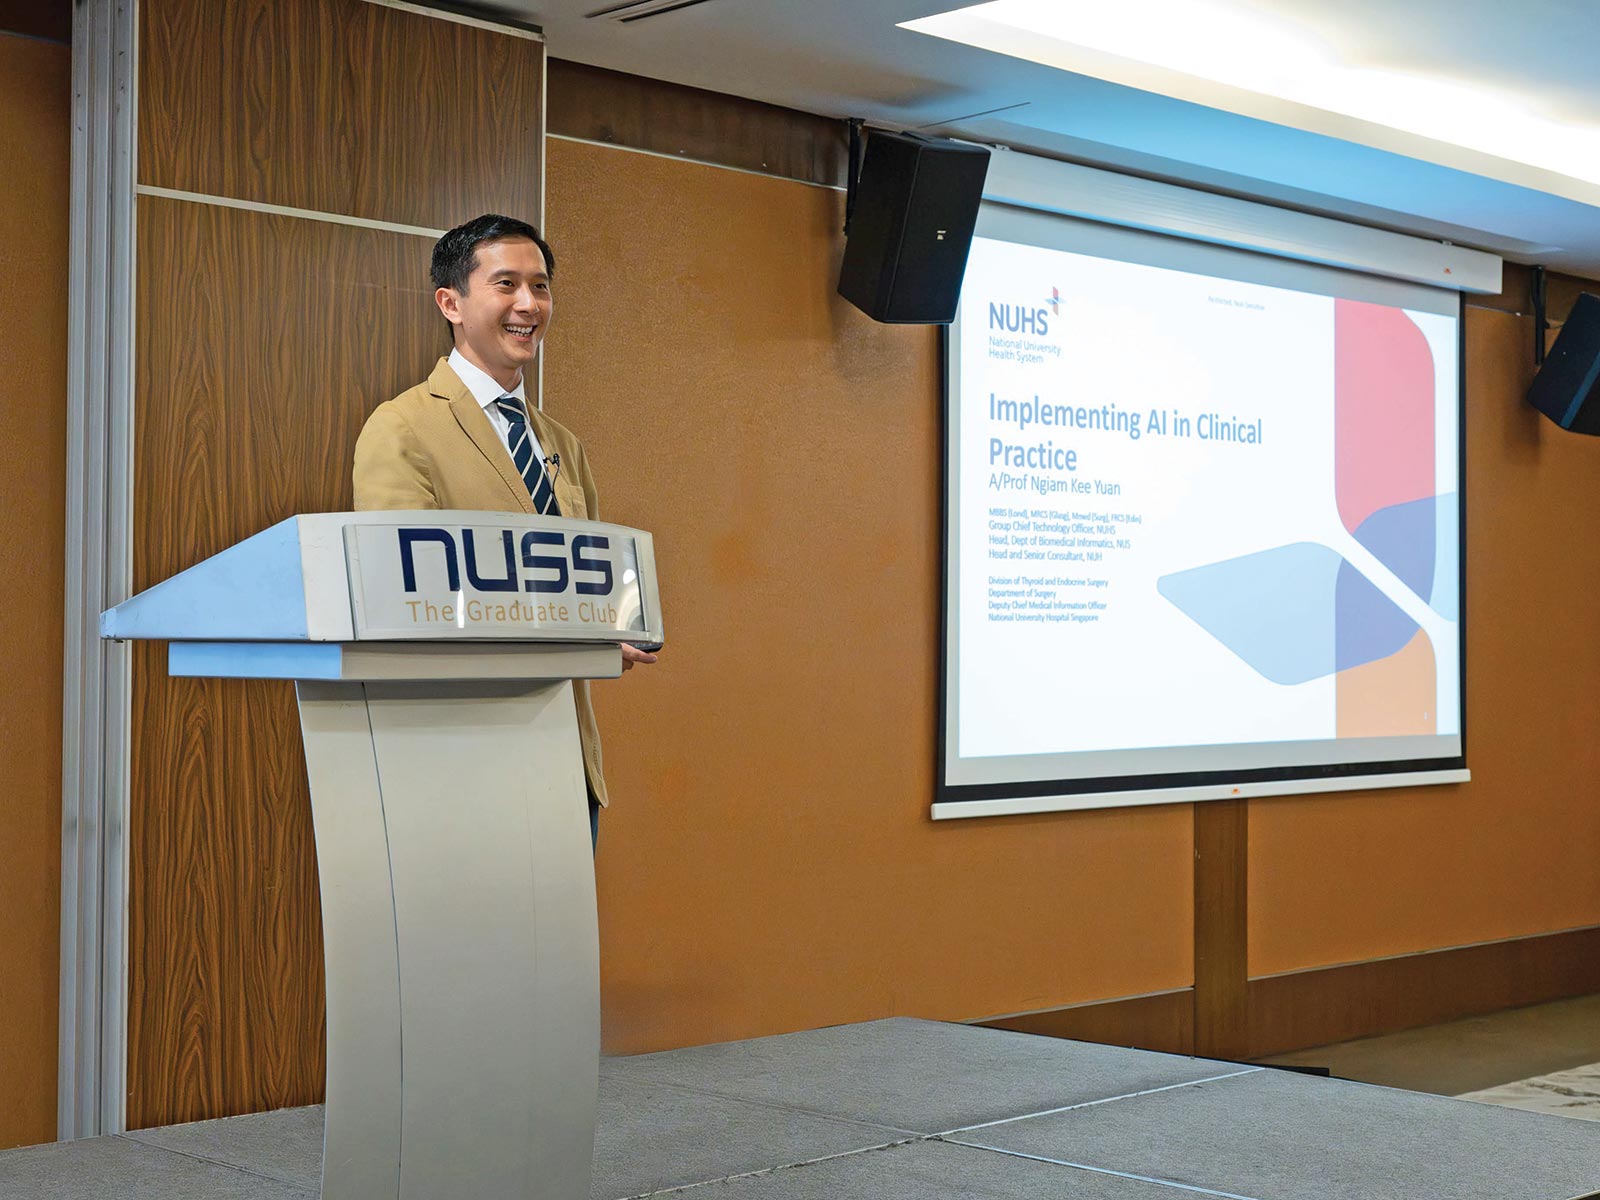 Associate Professor Ngiam Kee Yuan, Group Chief Technology Officer, National University Health System (NUHS), Head of the Department of Biomedical Informatics in NUS Medicine, spoke about AI in Clinical Practice, and its challenges.